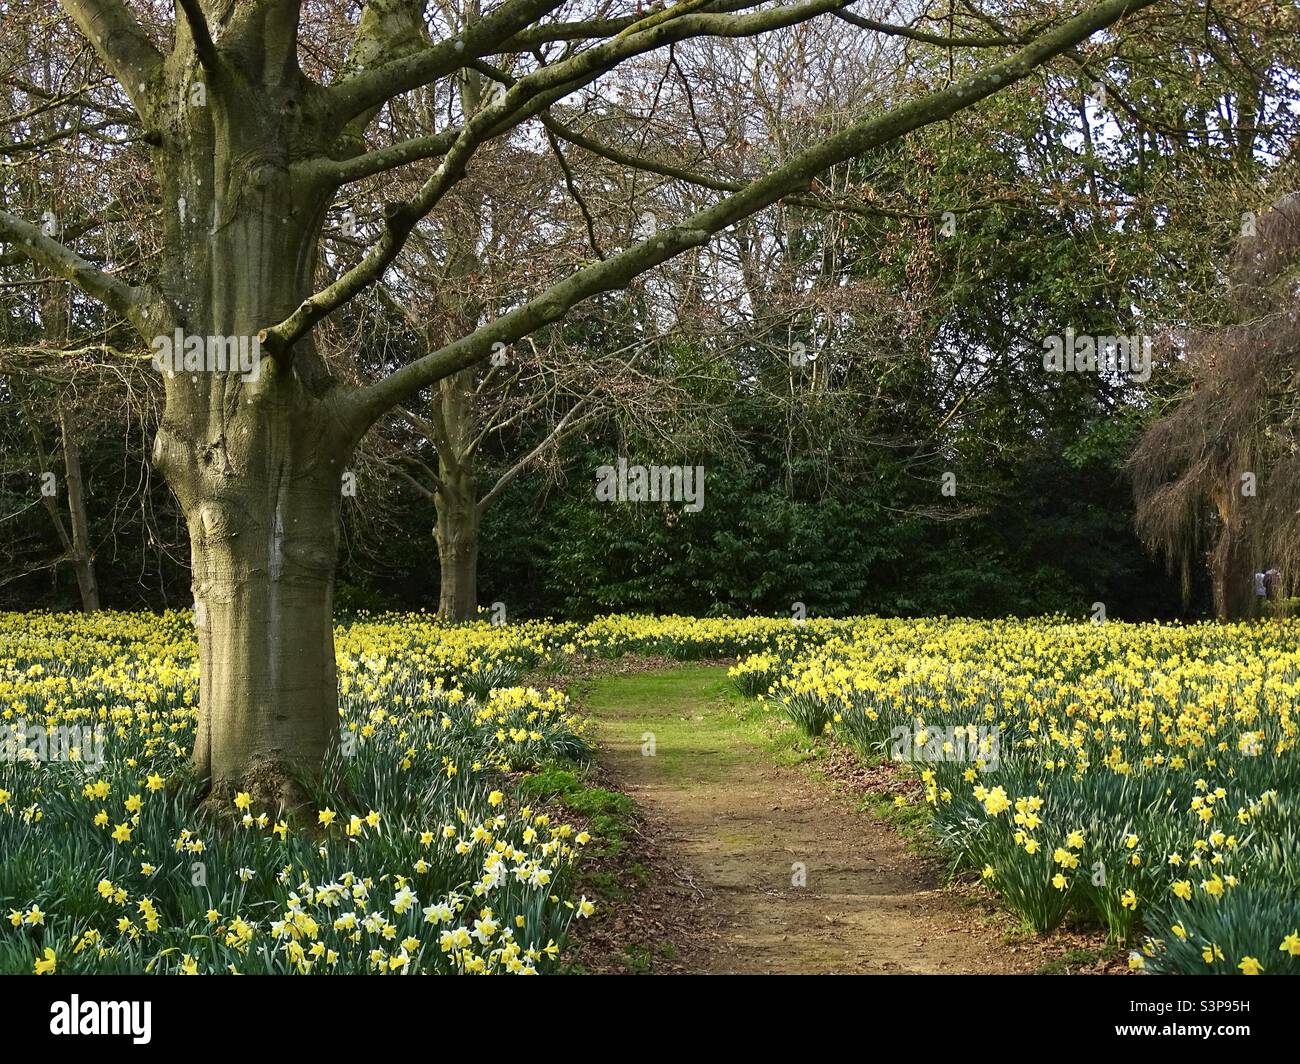 A path in the British countryside through a field of daffodils in springtime Stock Photo